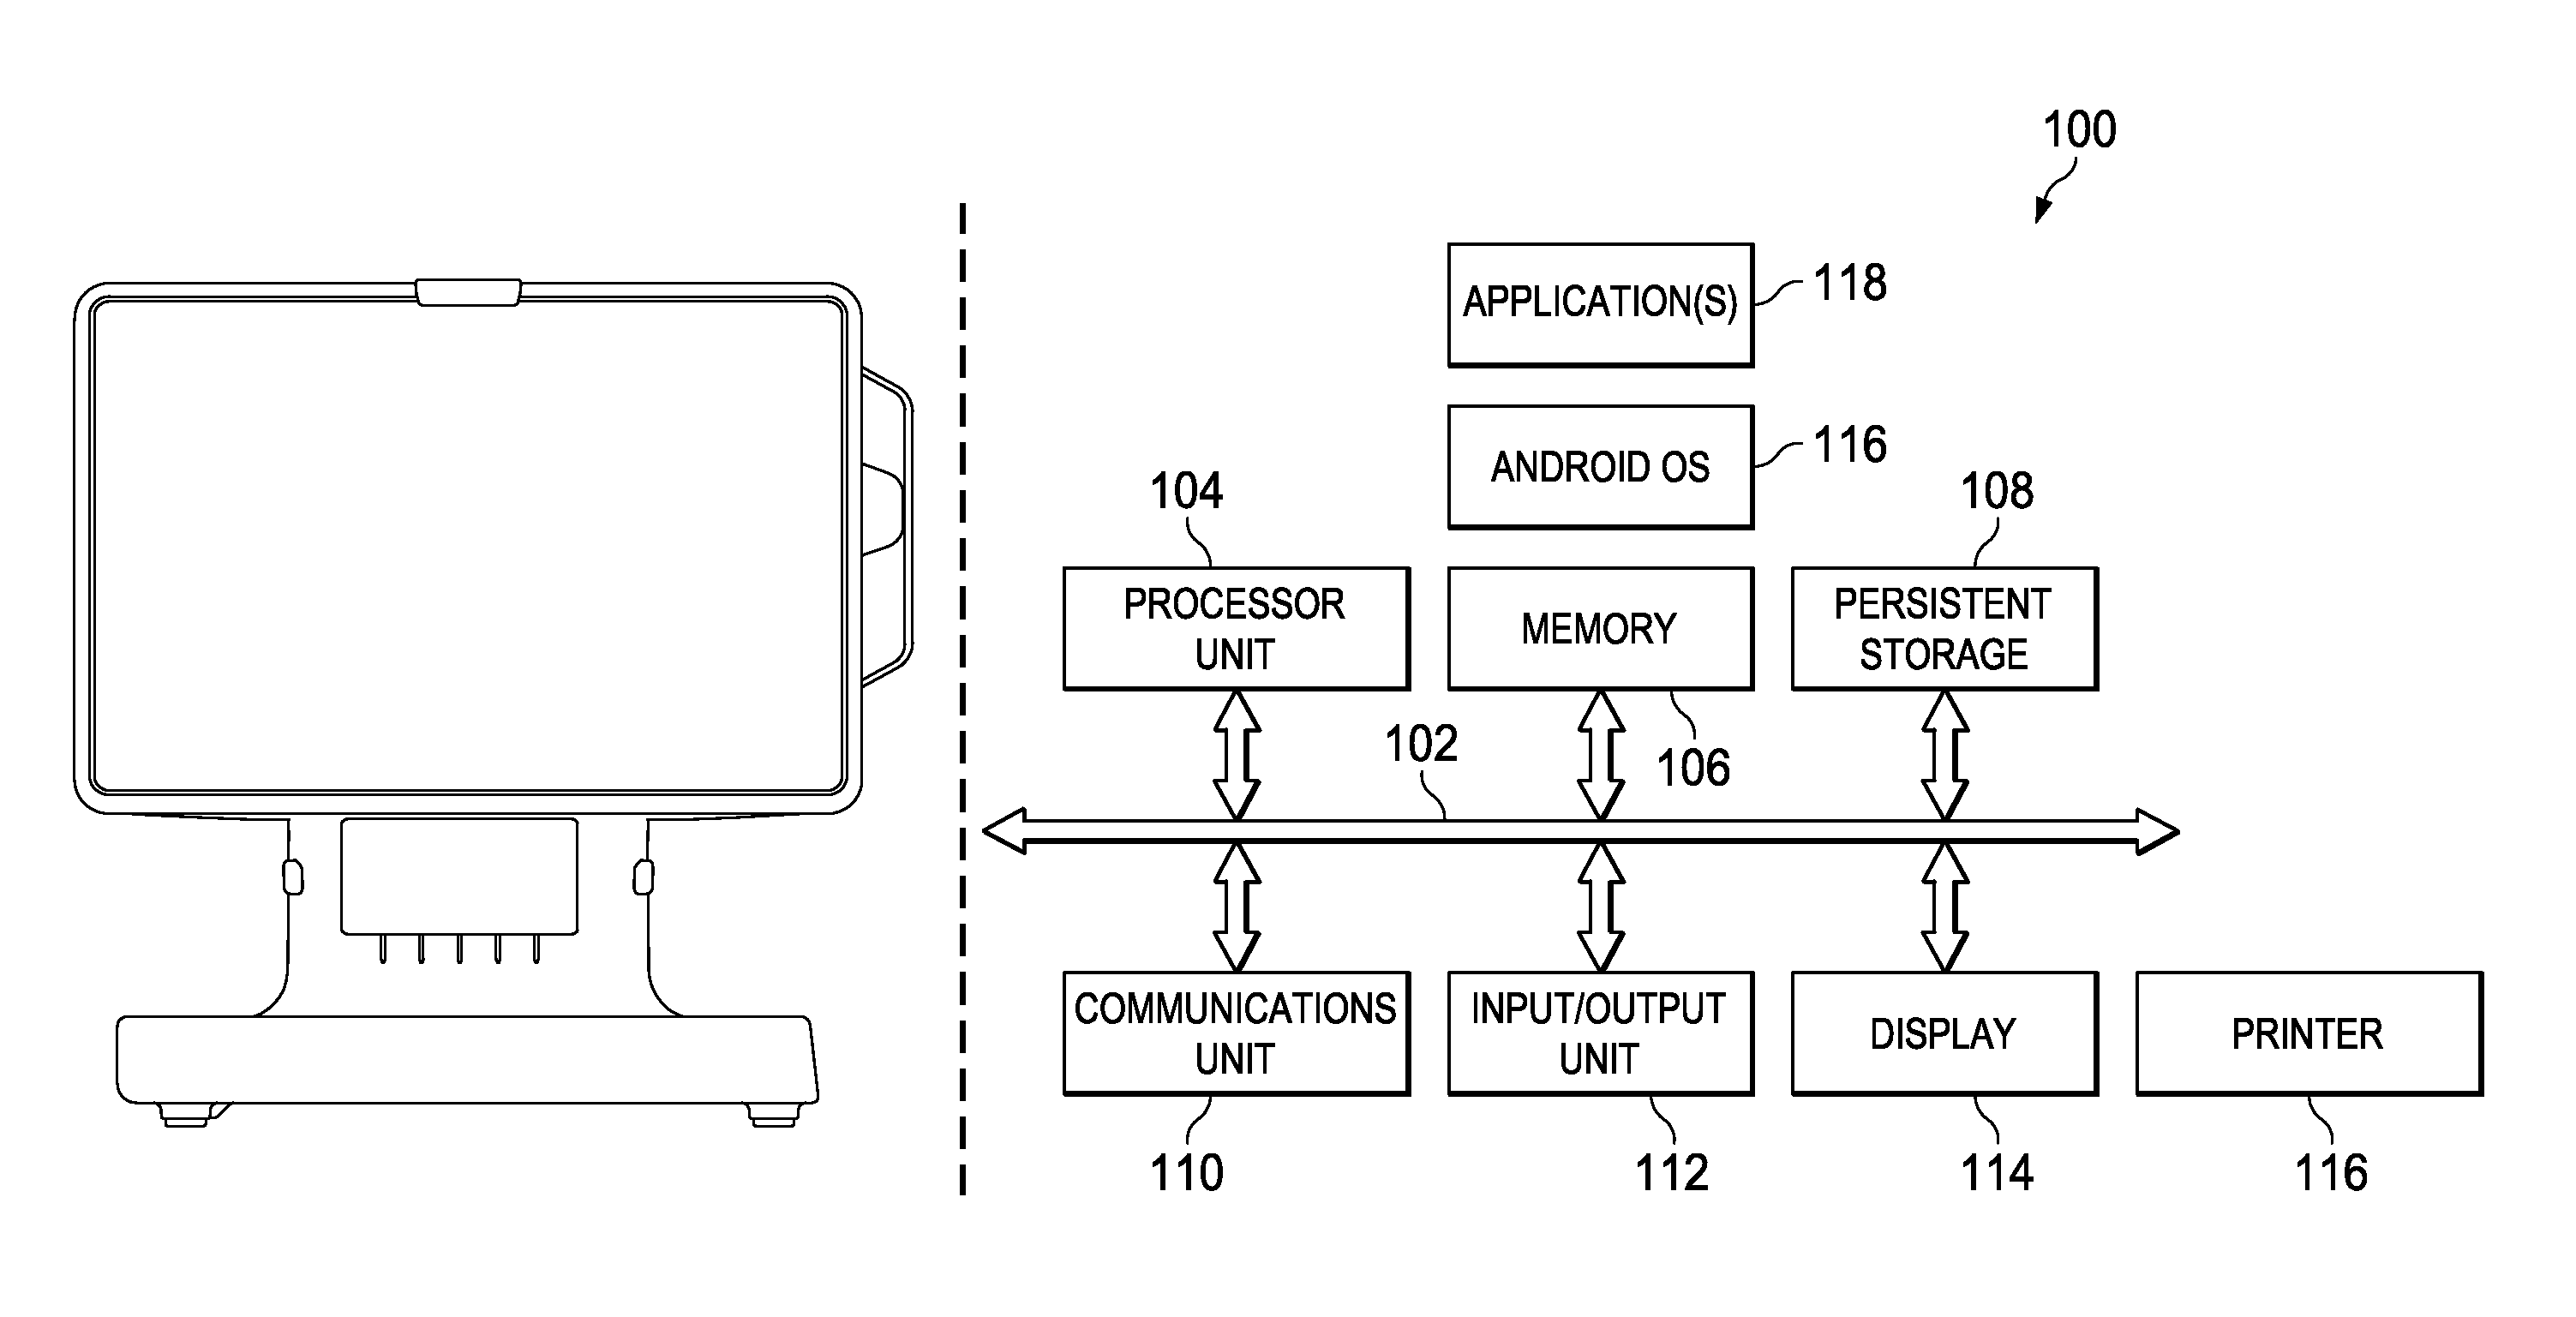 Printer control mechanism for a device having a mobile operating system